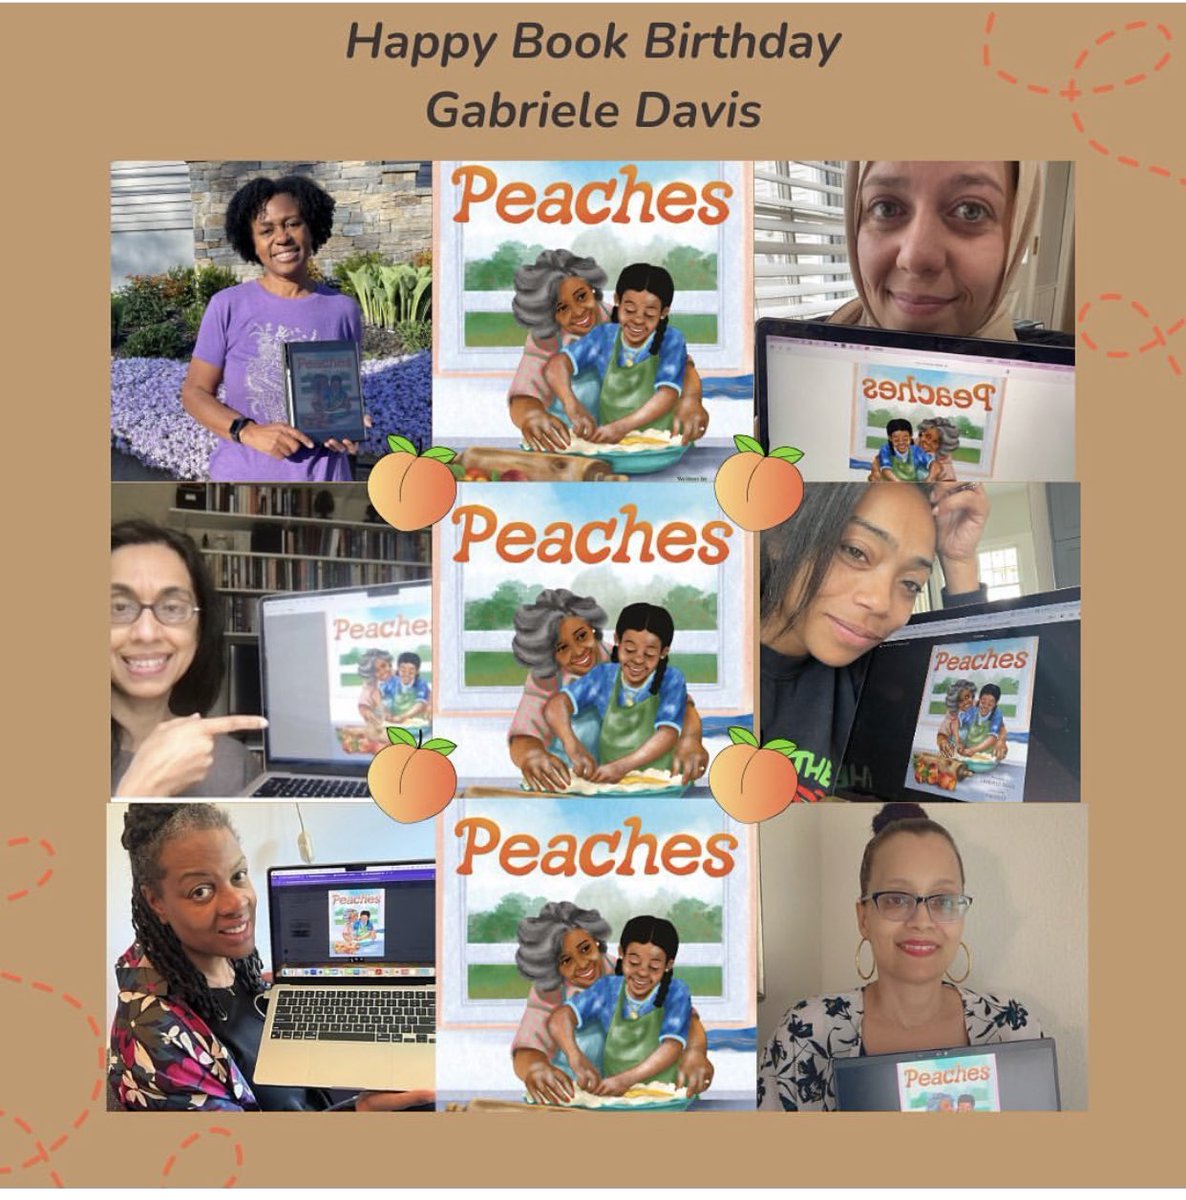 Happy Book Birthday to our very own @GDavisBooks! 🍑 We’re so excited your book PEACHES is in the world today. 🎉🎊🤗. Peaches is beautifully illus. by Kim Holt Please order PEACHES wherever books are sold and request at your local library. Read more: kidlitincolor.com/blog/cover-rev…